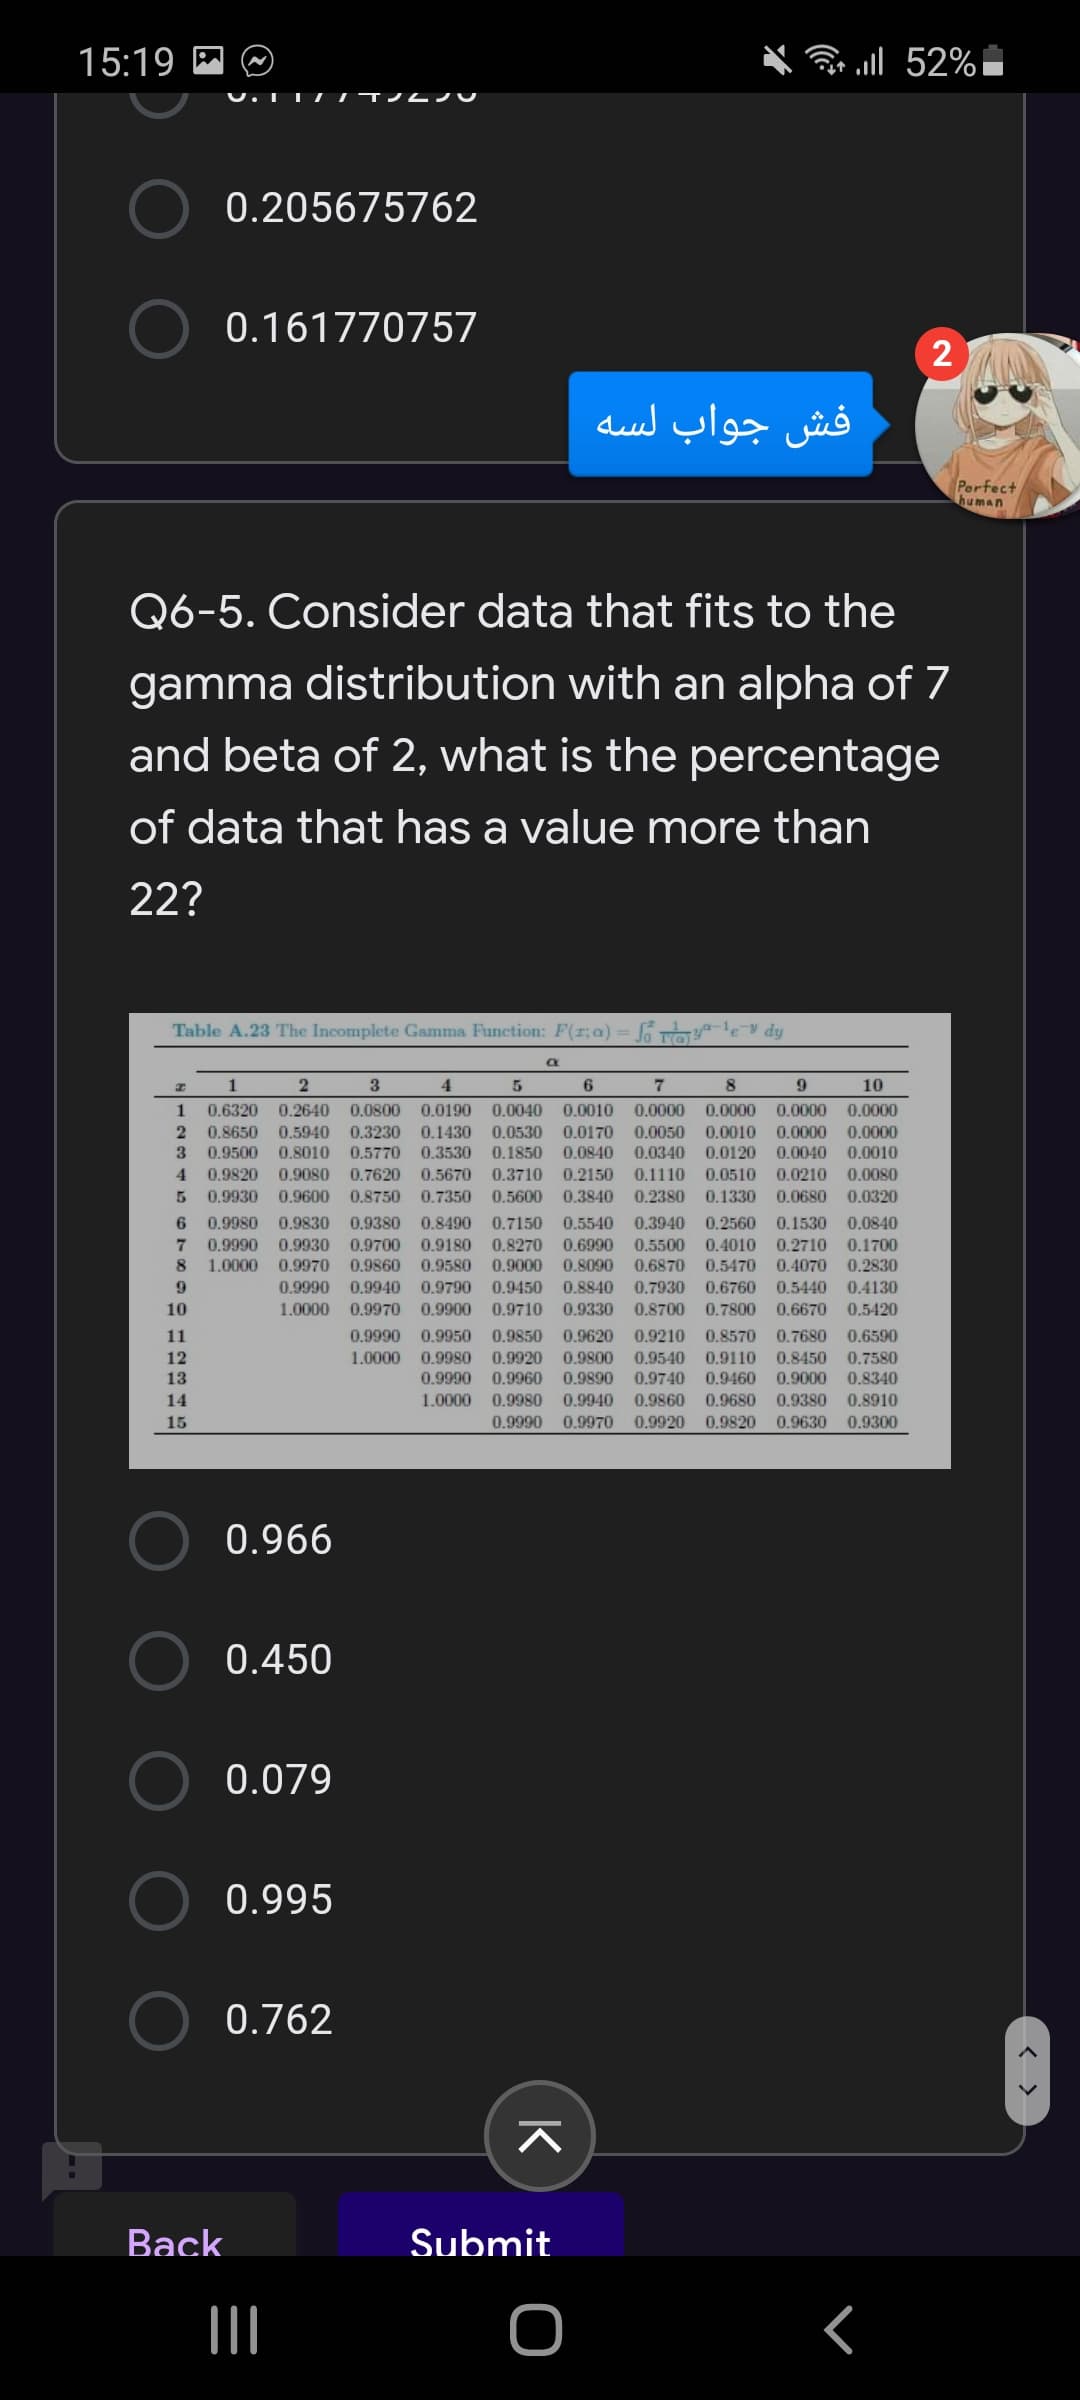 Q6-5. Consider data that fits to the
gamma distribution with an alpha of 7
and beta of 2, what is the percentage
of data that has a value more than
22?
